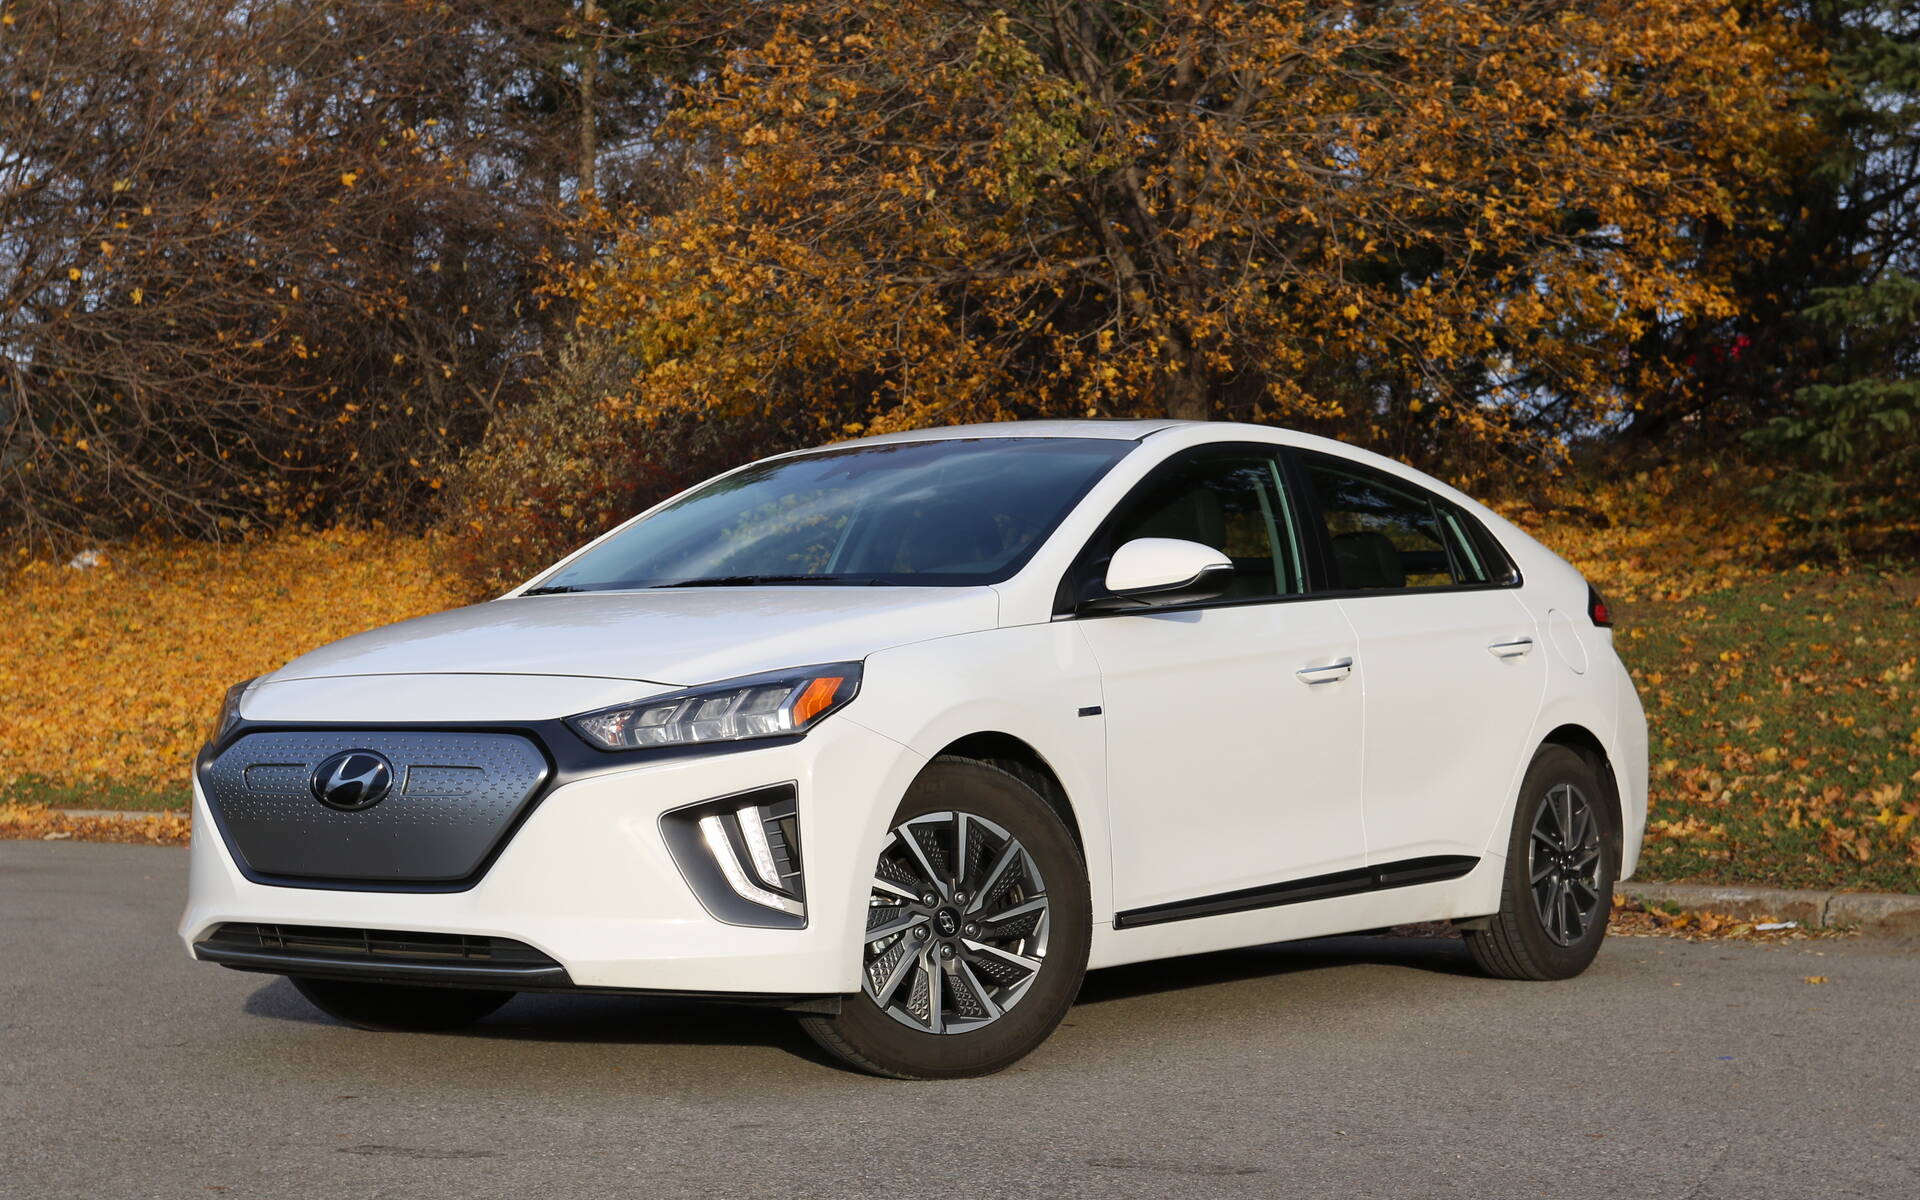 https://i.gaw.to/content/photos/45/05/450503-hyundai-ioniq-2020-on-l-oublie-souvent.jpeg